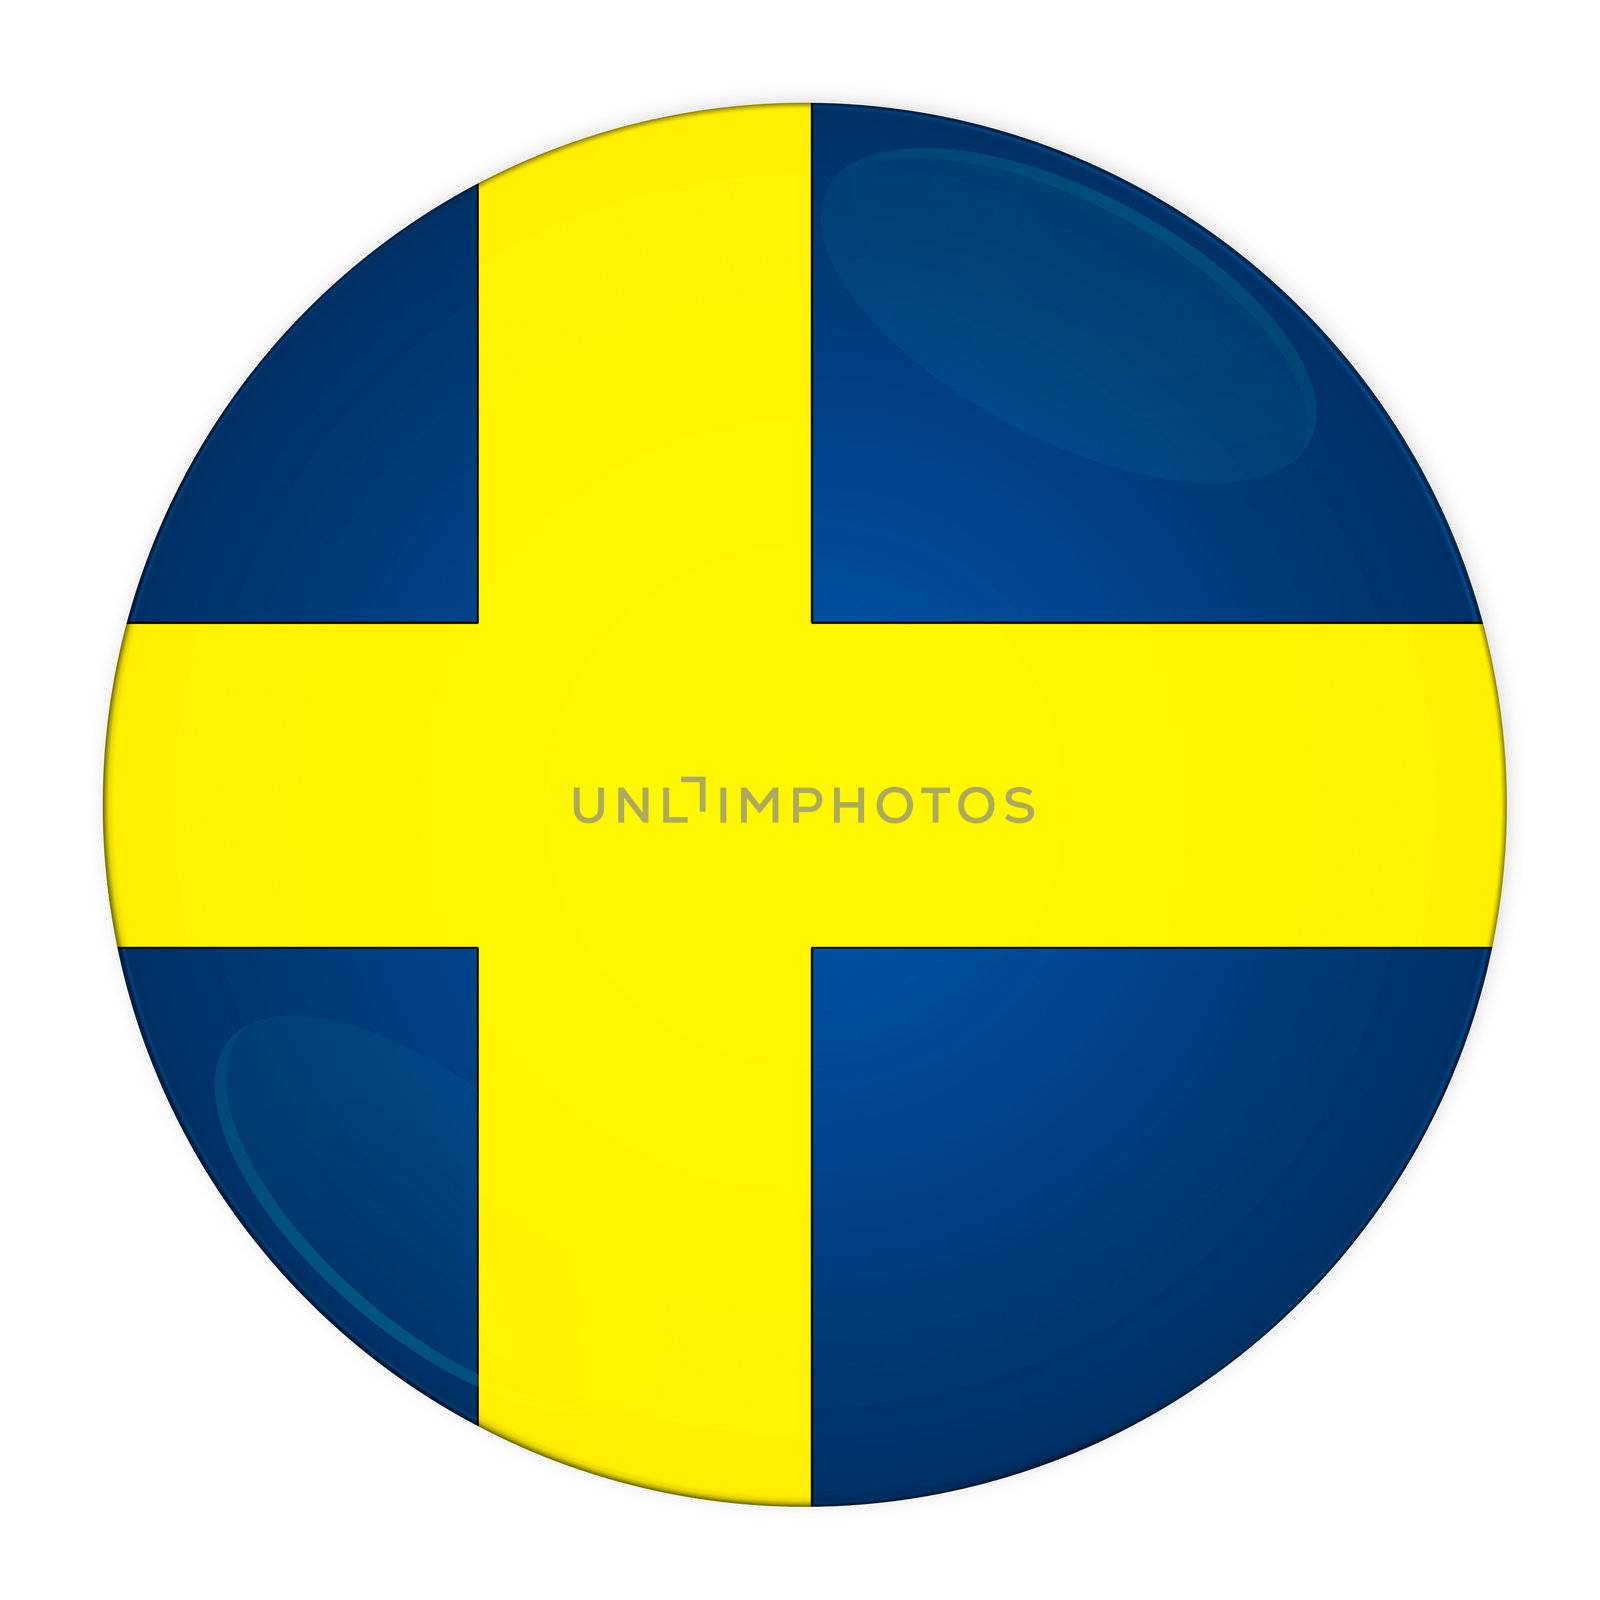 Abstract illustration: button with flag from Sweden country